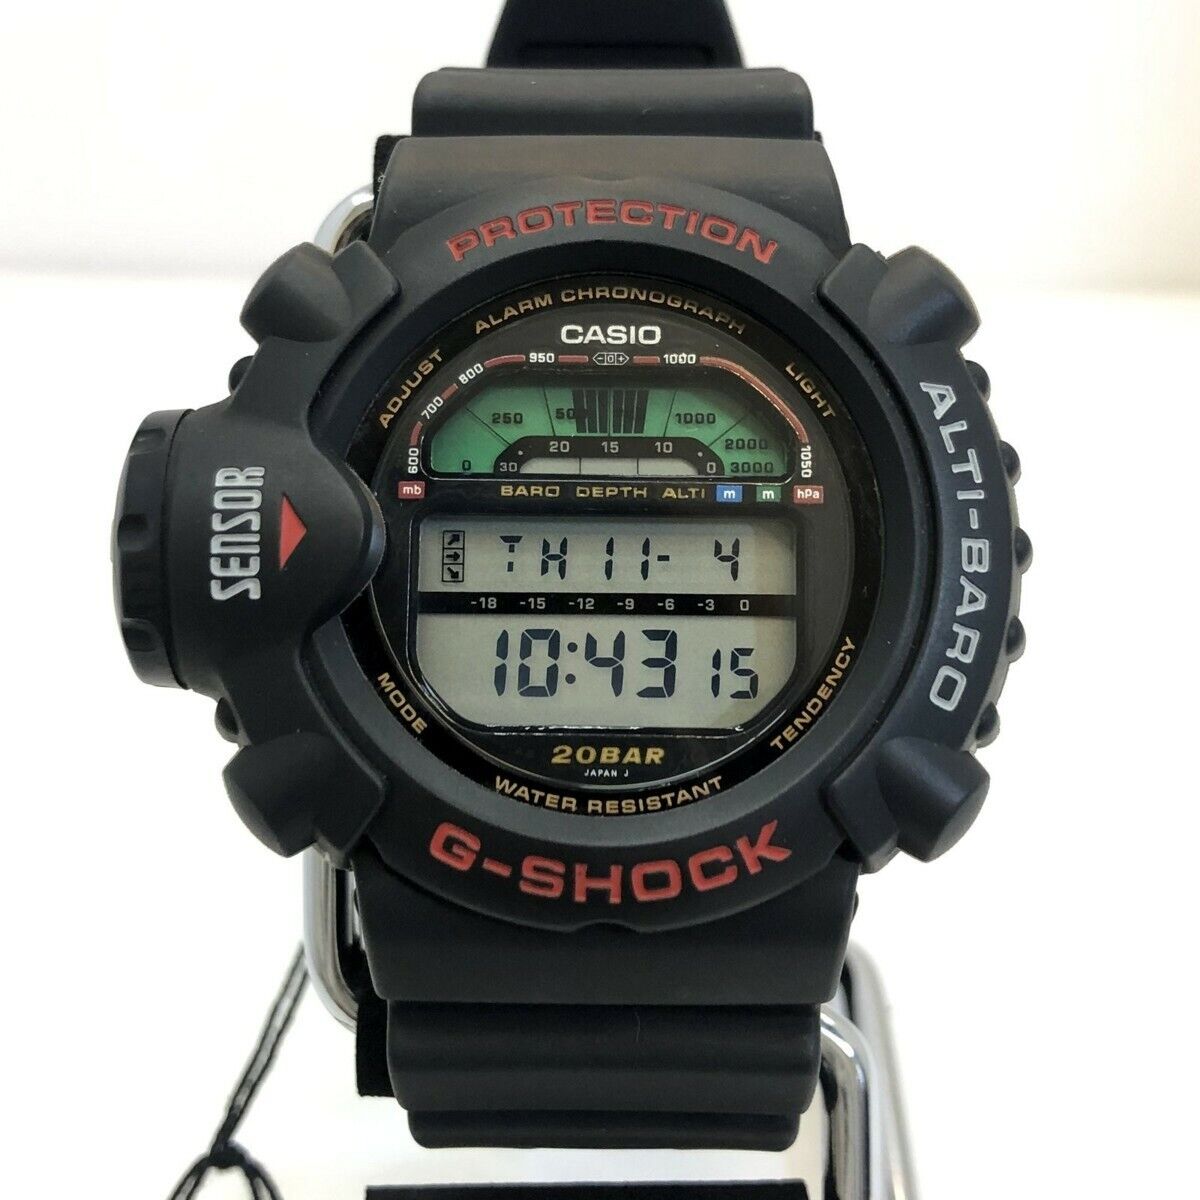 Casio G-shock SKYFORCE DW-6500 J-1A Second hand from Japan 